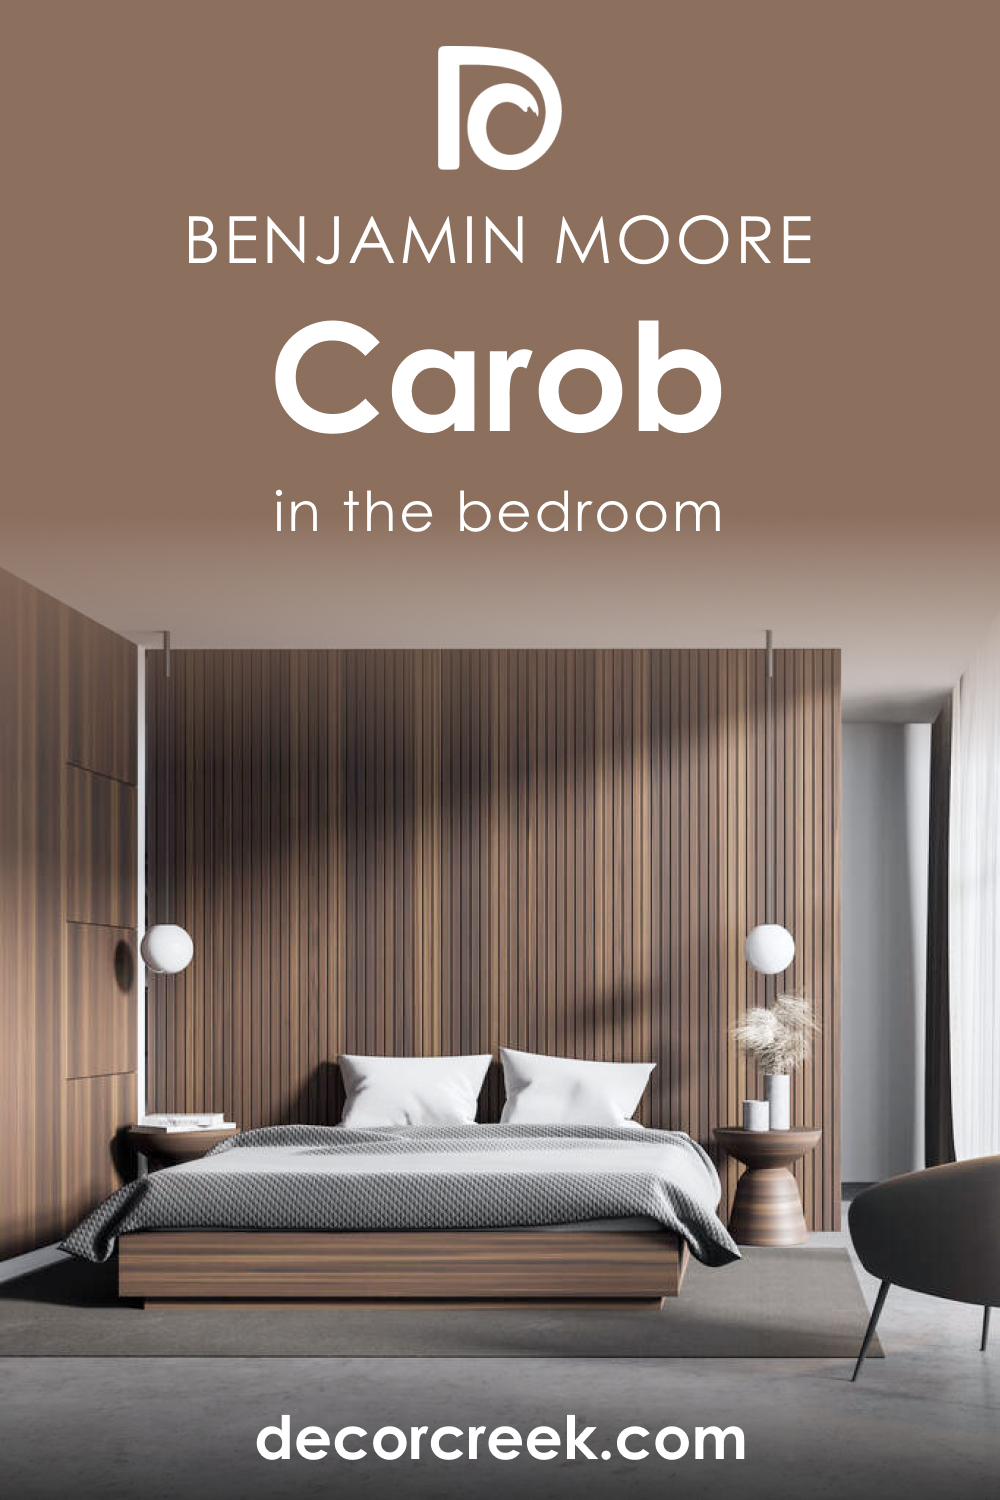 How to Use Carob AF-160 in the Bedroom?